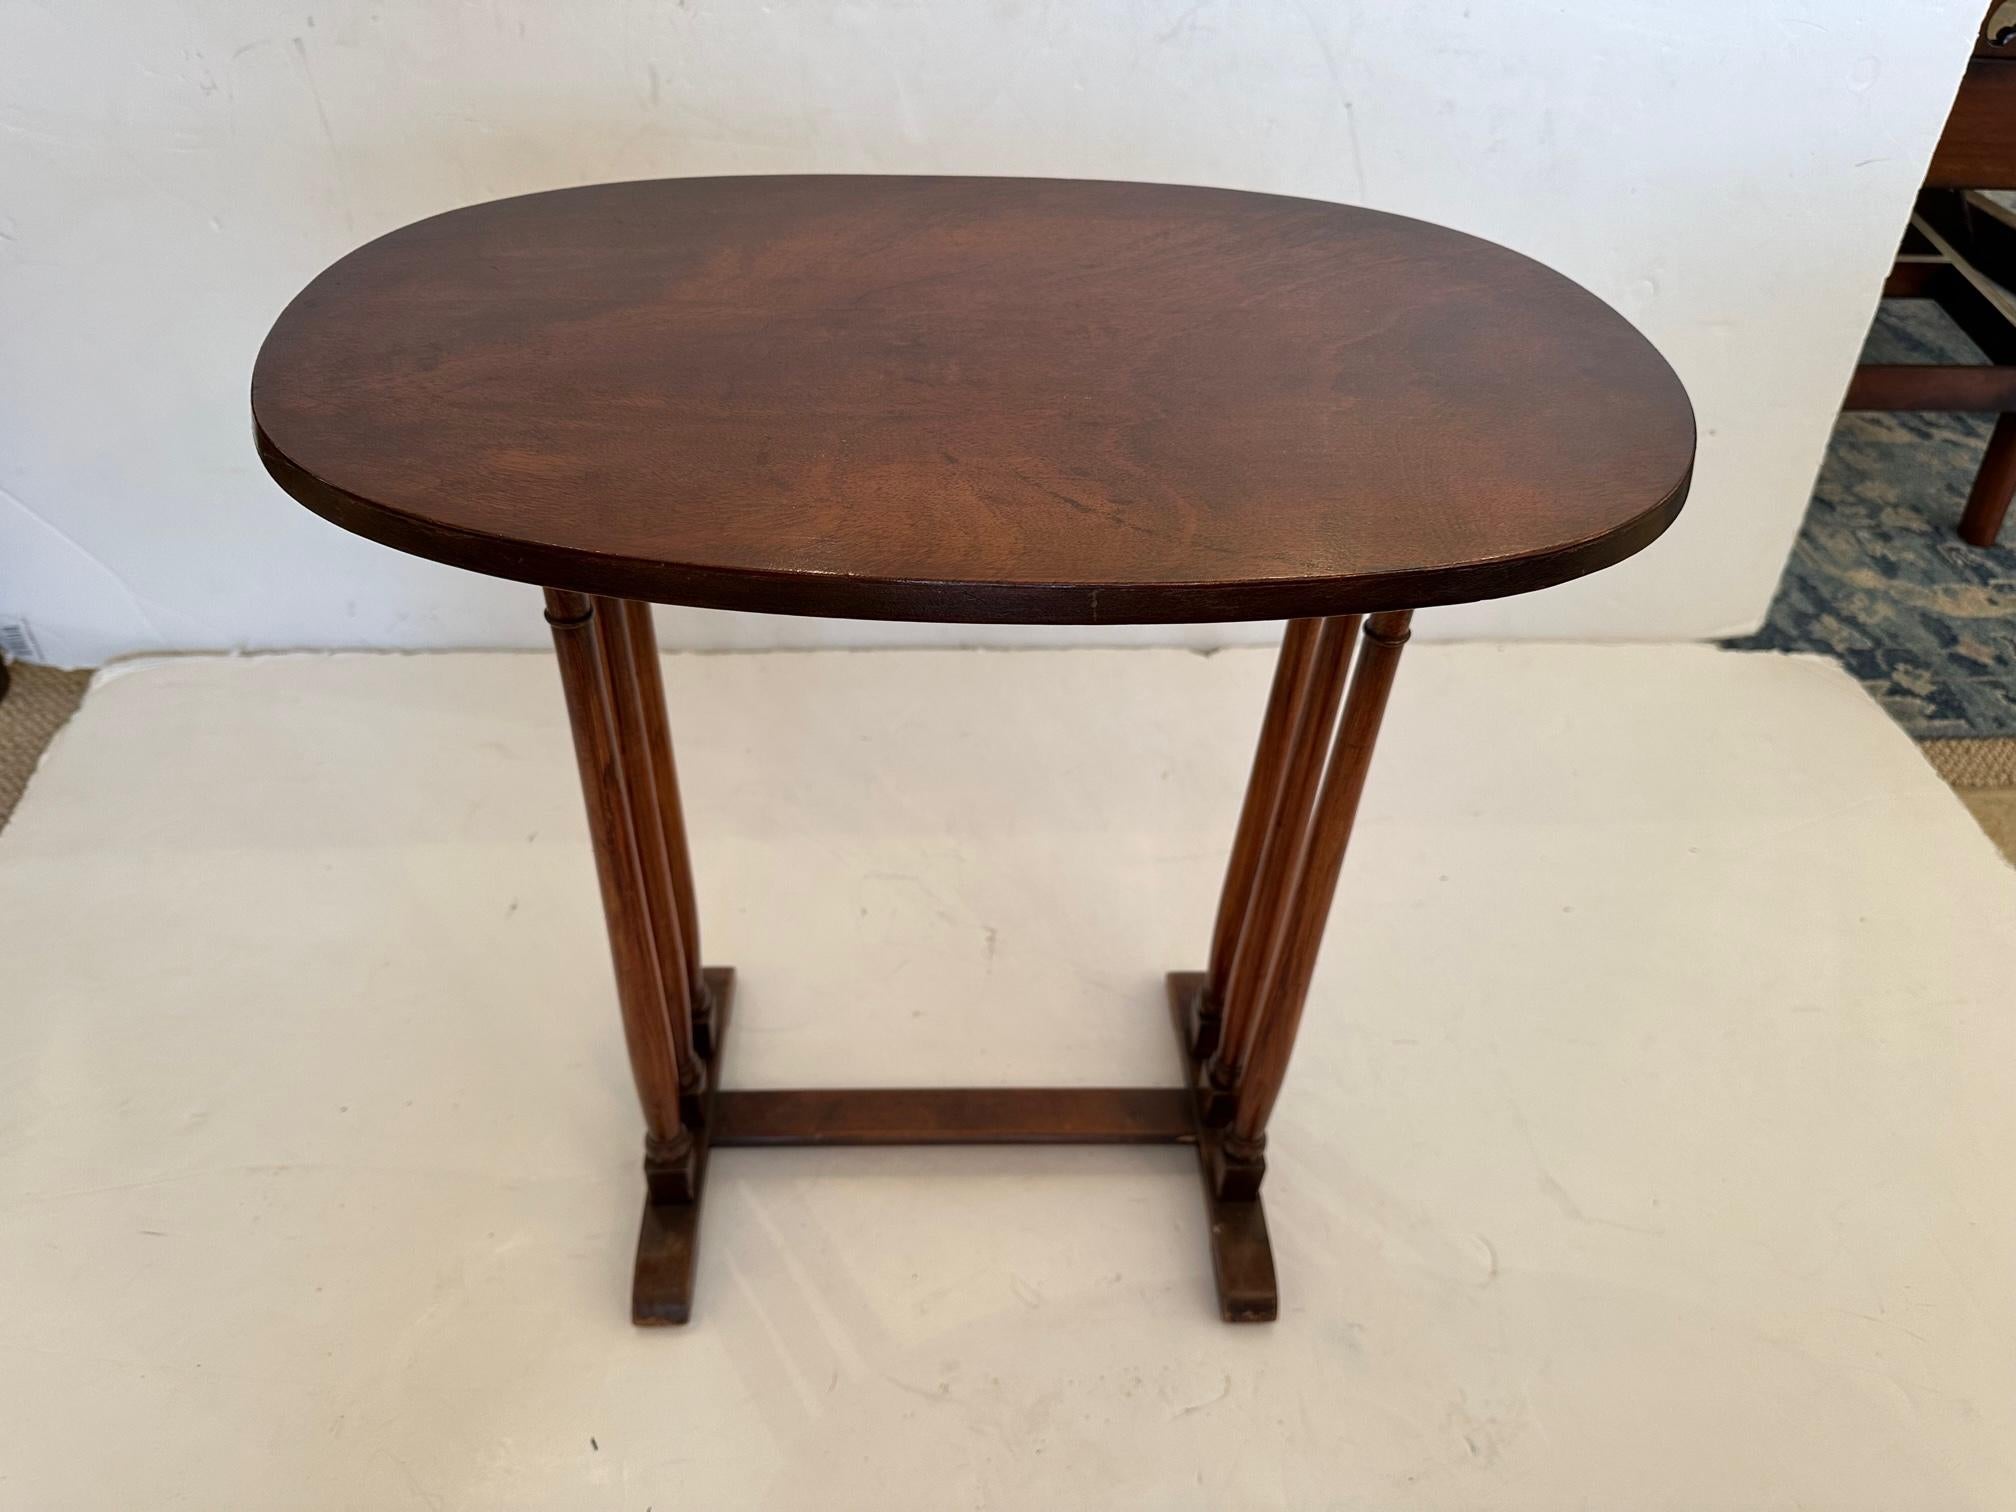 Darling Small Elegant Antique Oval Mahogany Martini End Table For Sale 1